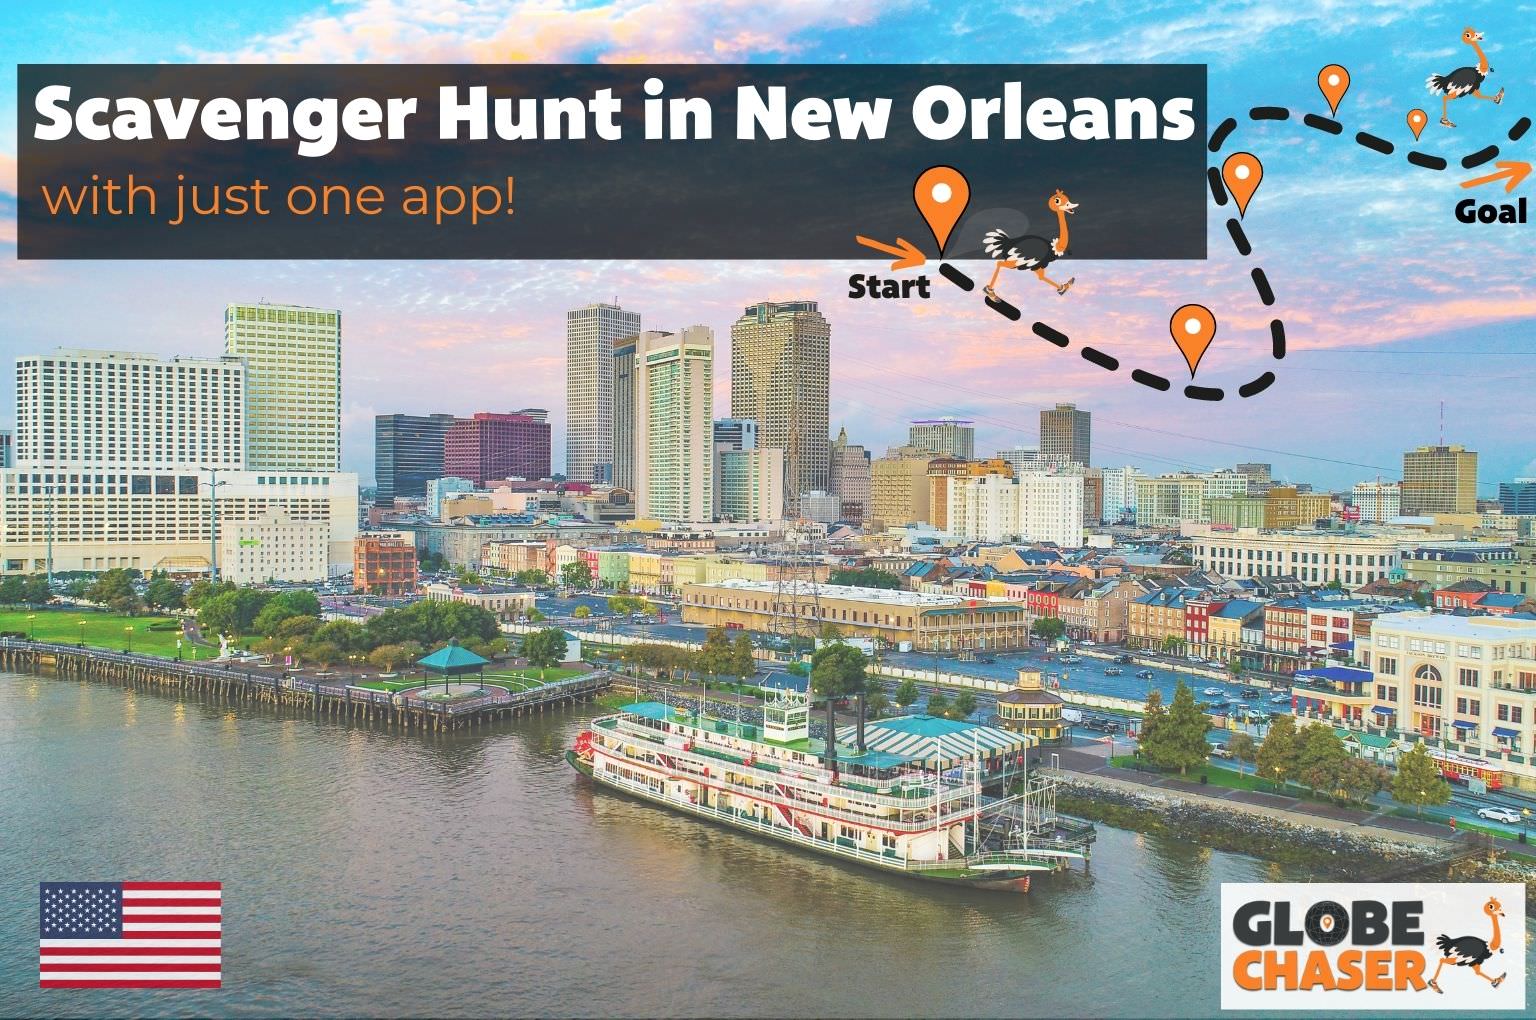 Scavenger Hunt in New Orleans, USA - Family Activities with the Globe Chaser App for Outdoor Fun